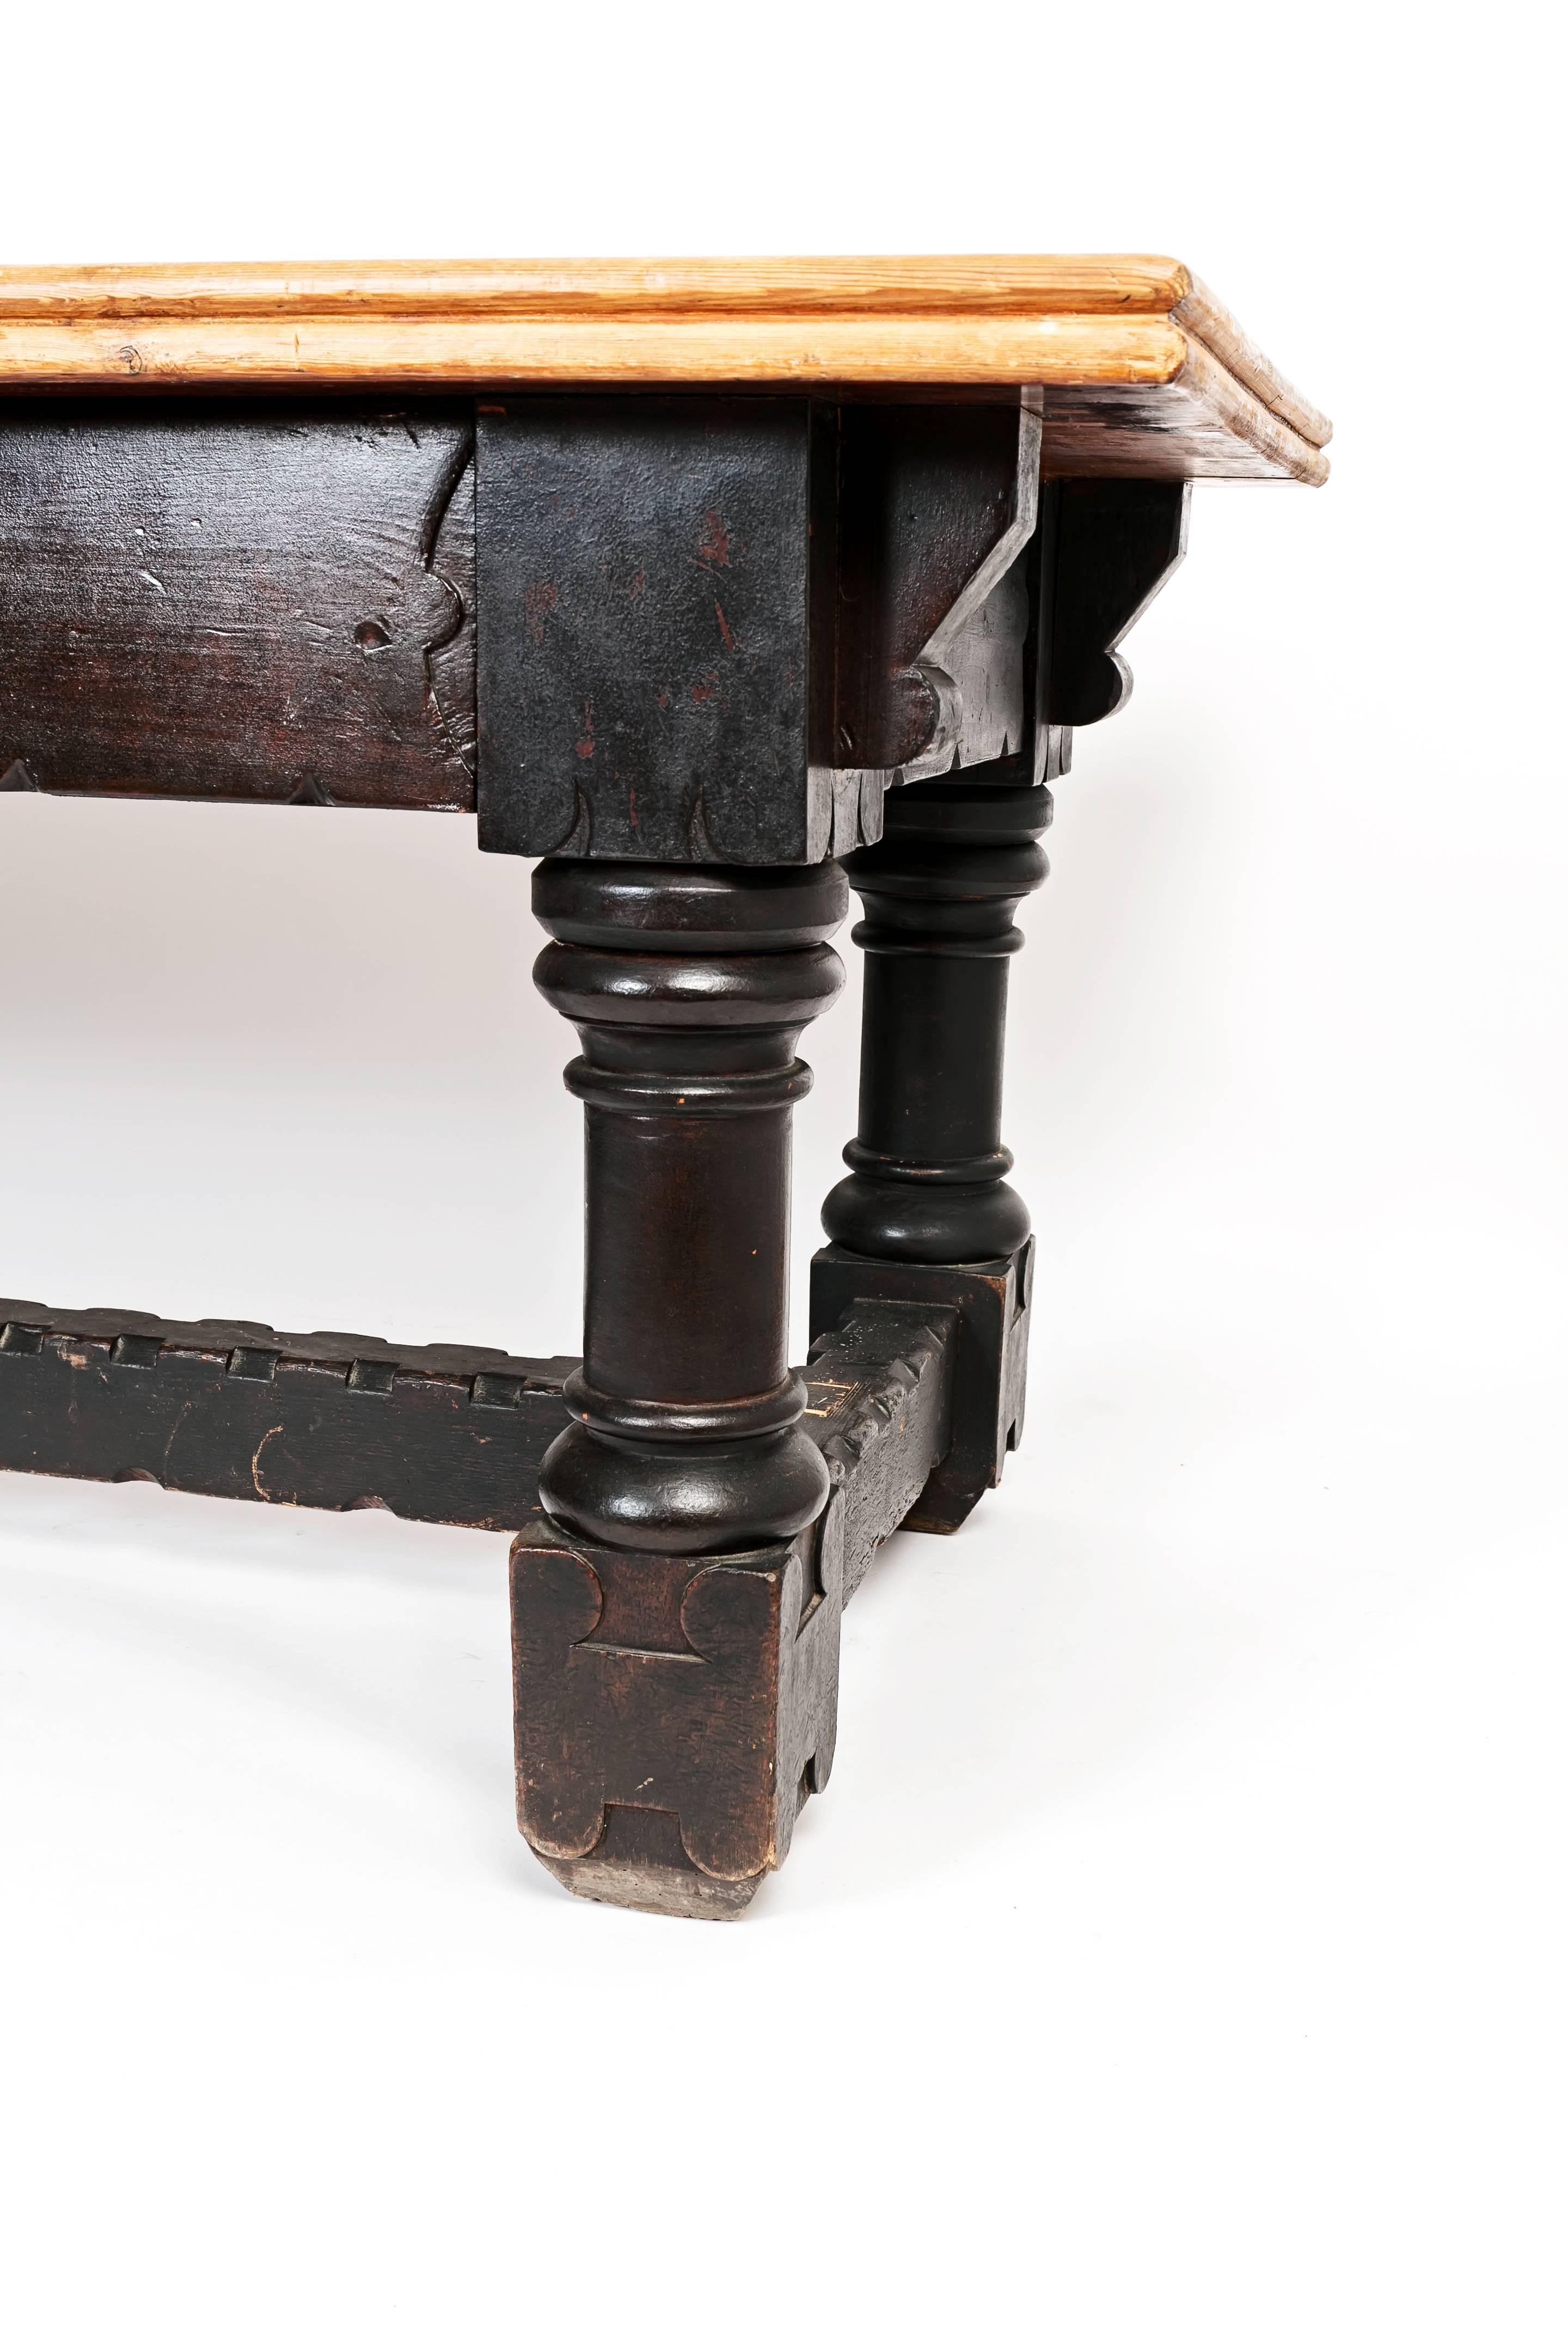 Wood 19th Century English Country Table